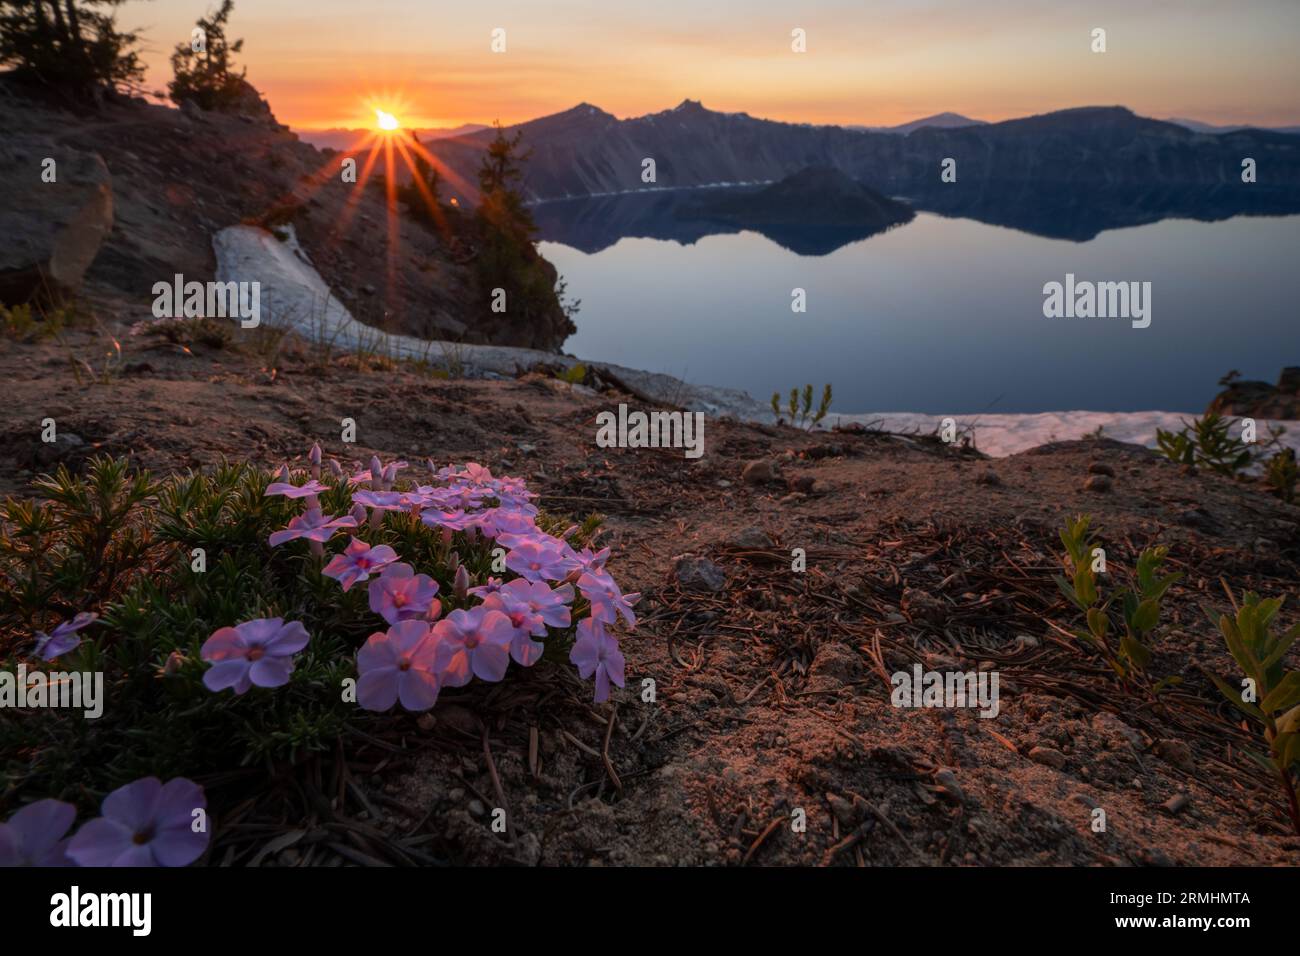 Phlox Blossoms in front of Golden Sunset Late at Crater Lake National Park Stock Photo